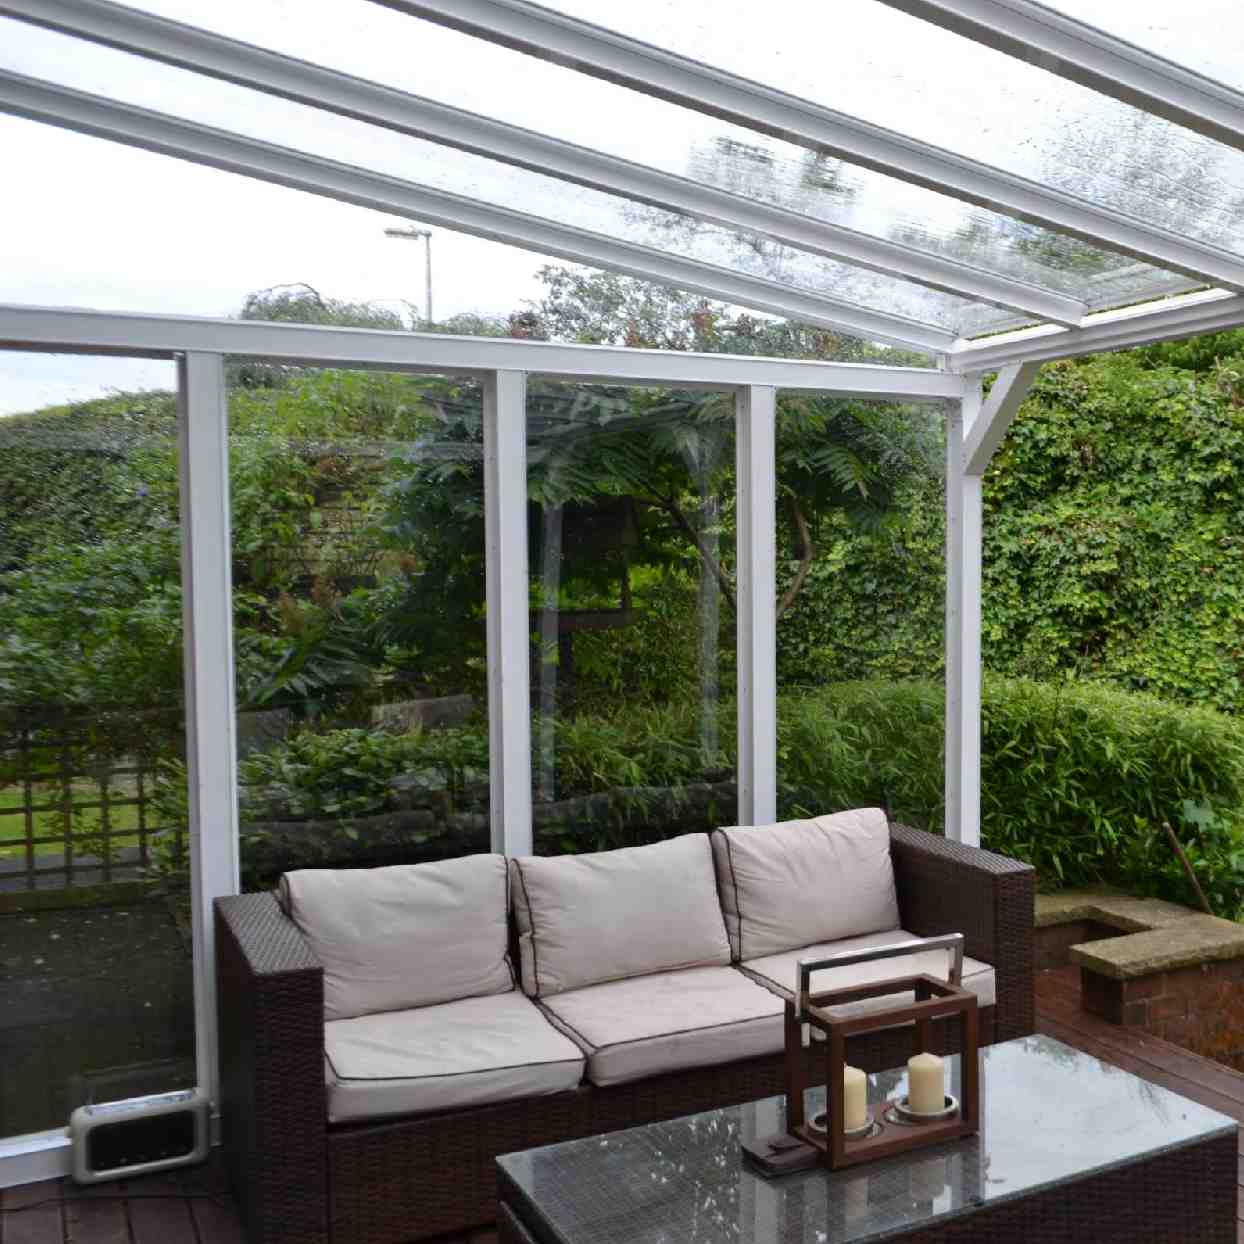 Buy Omega Verandah White with 6mm Glass Clear Plate Polycarbonate Glazing - 4.9m (W) x 1.5m (P), (3) Supporting Posts online today